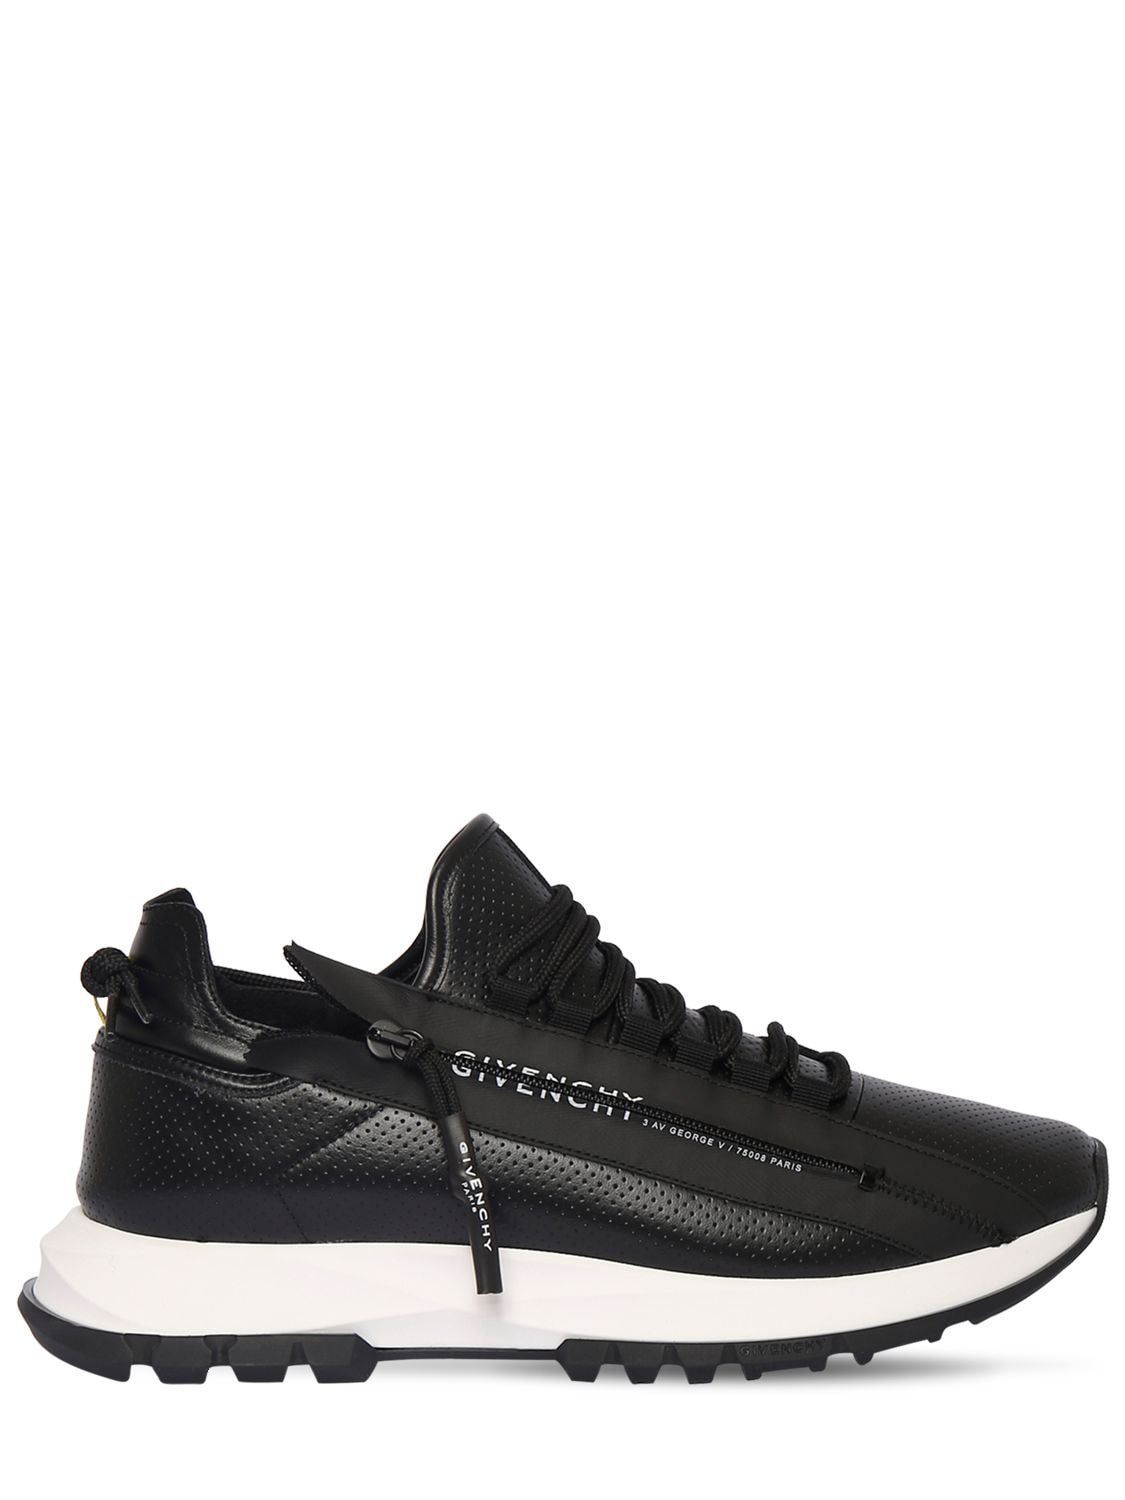 Givenchy Black Spectre Runner Leather 